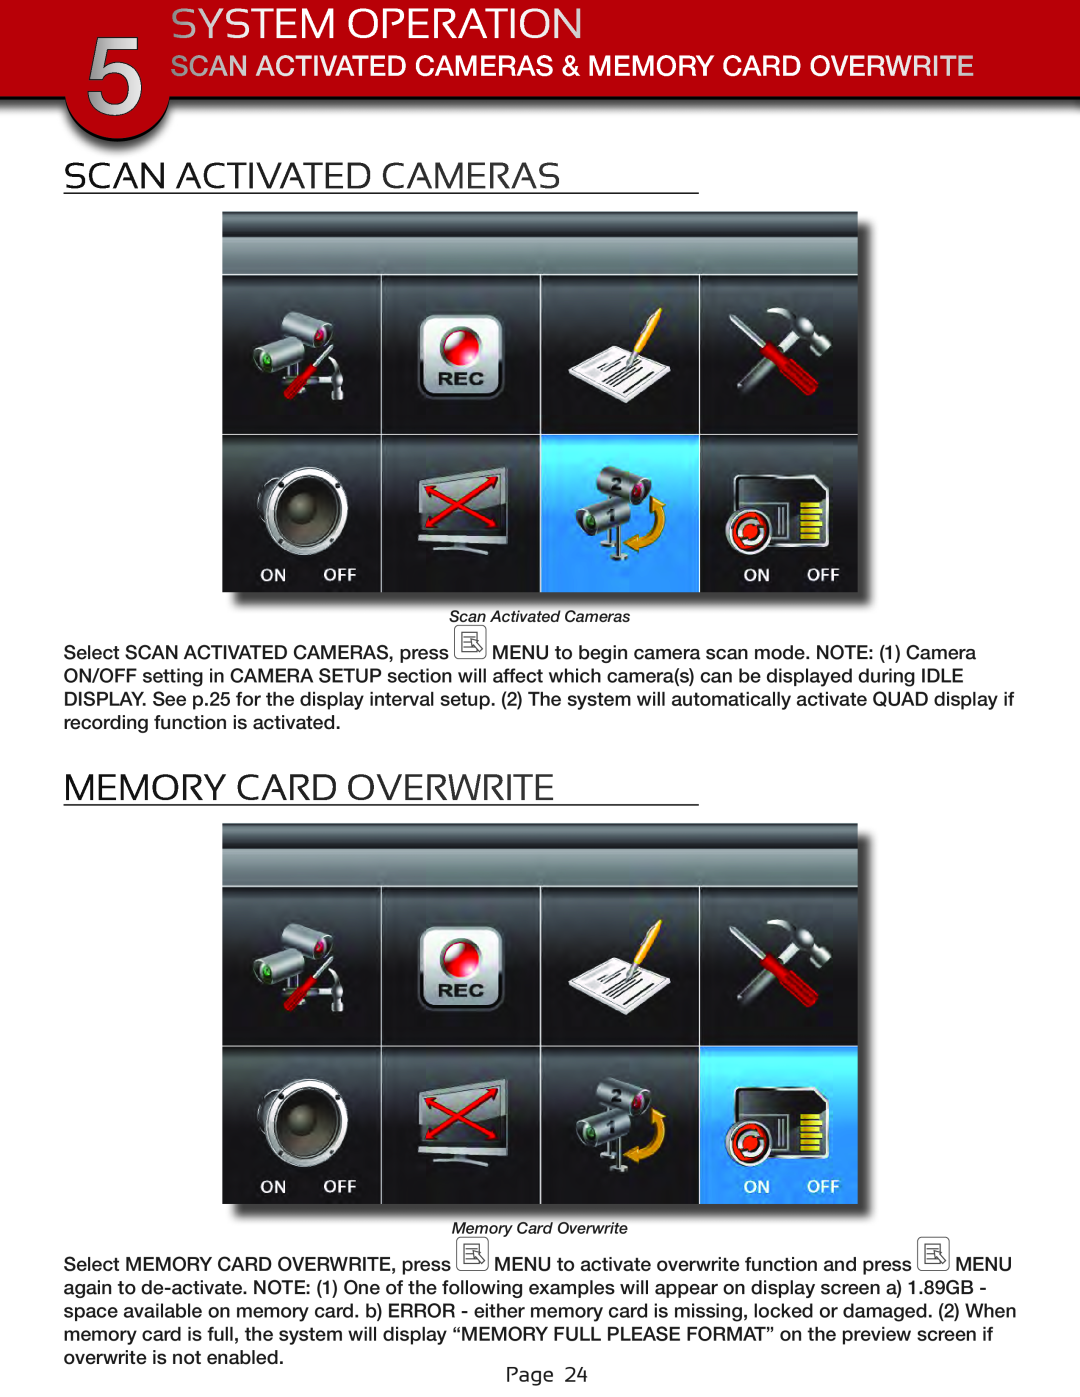 First Alert DWS-472, DWS-471 user manual Scan Activated Cameras & Memory Card Overwrite, System Operation 